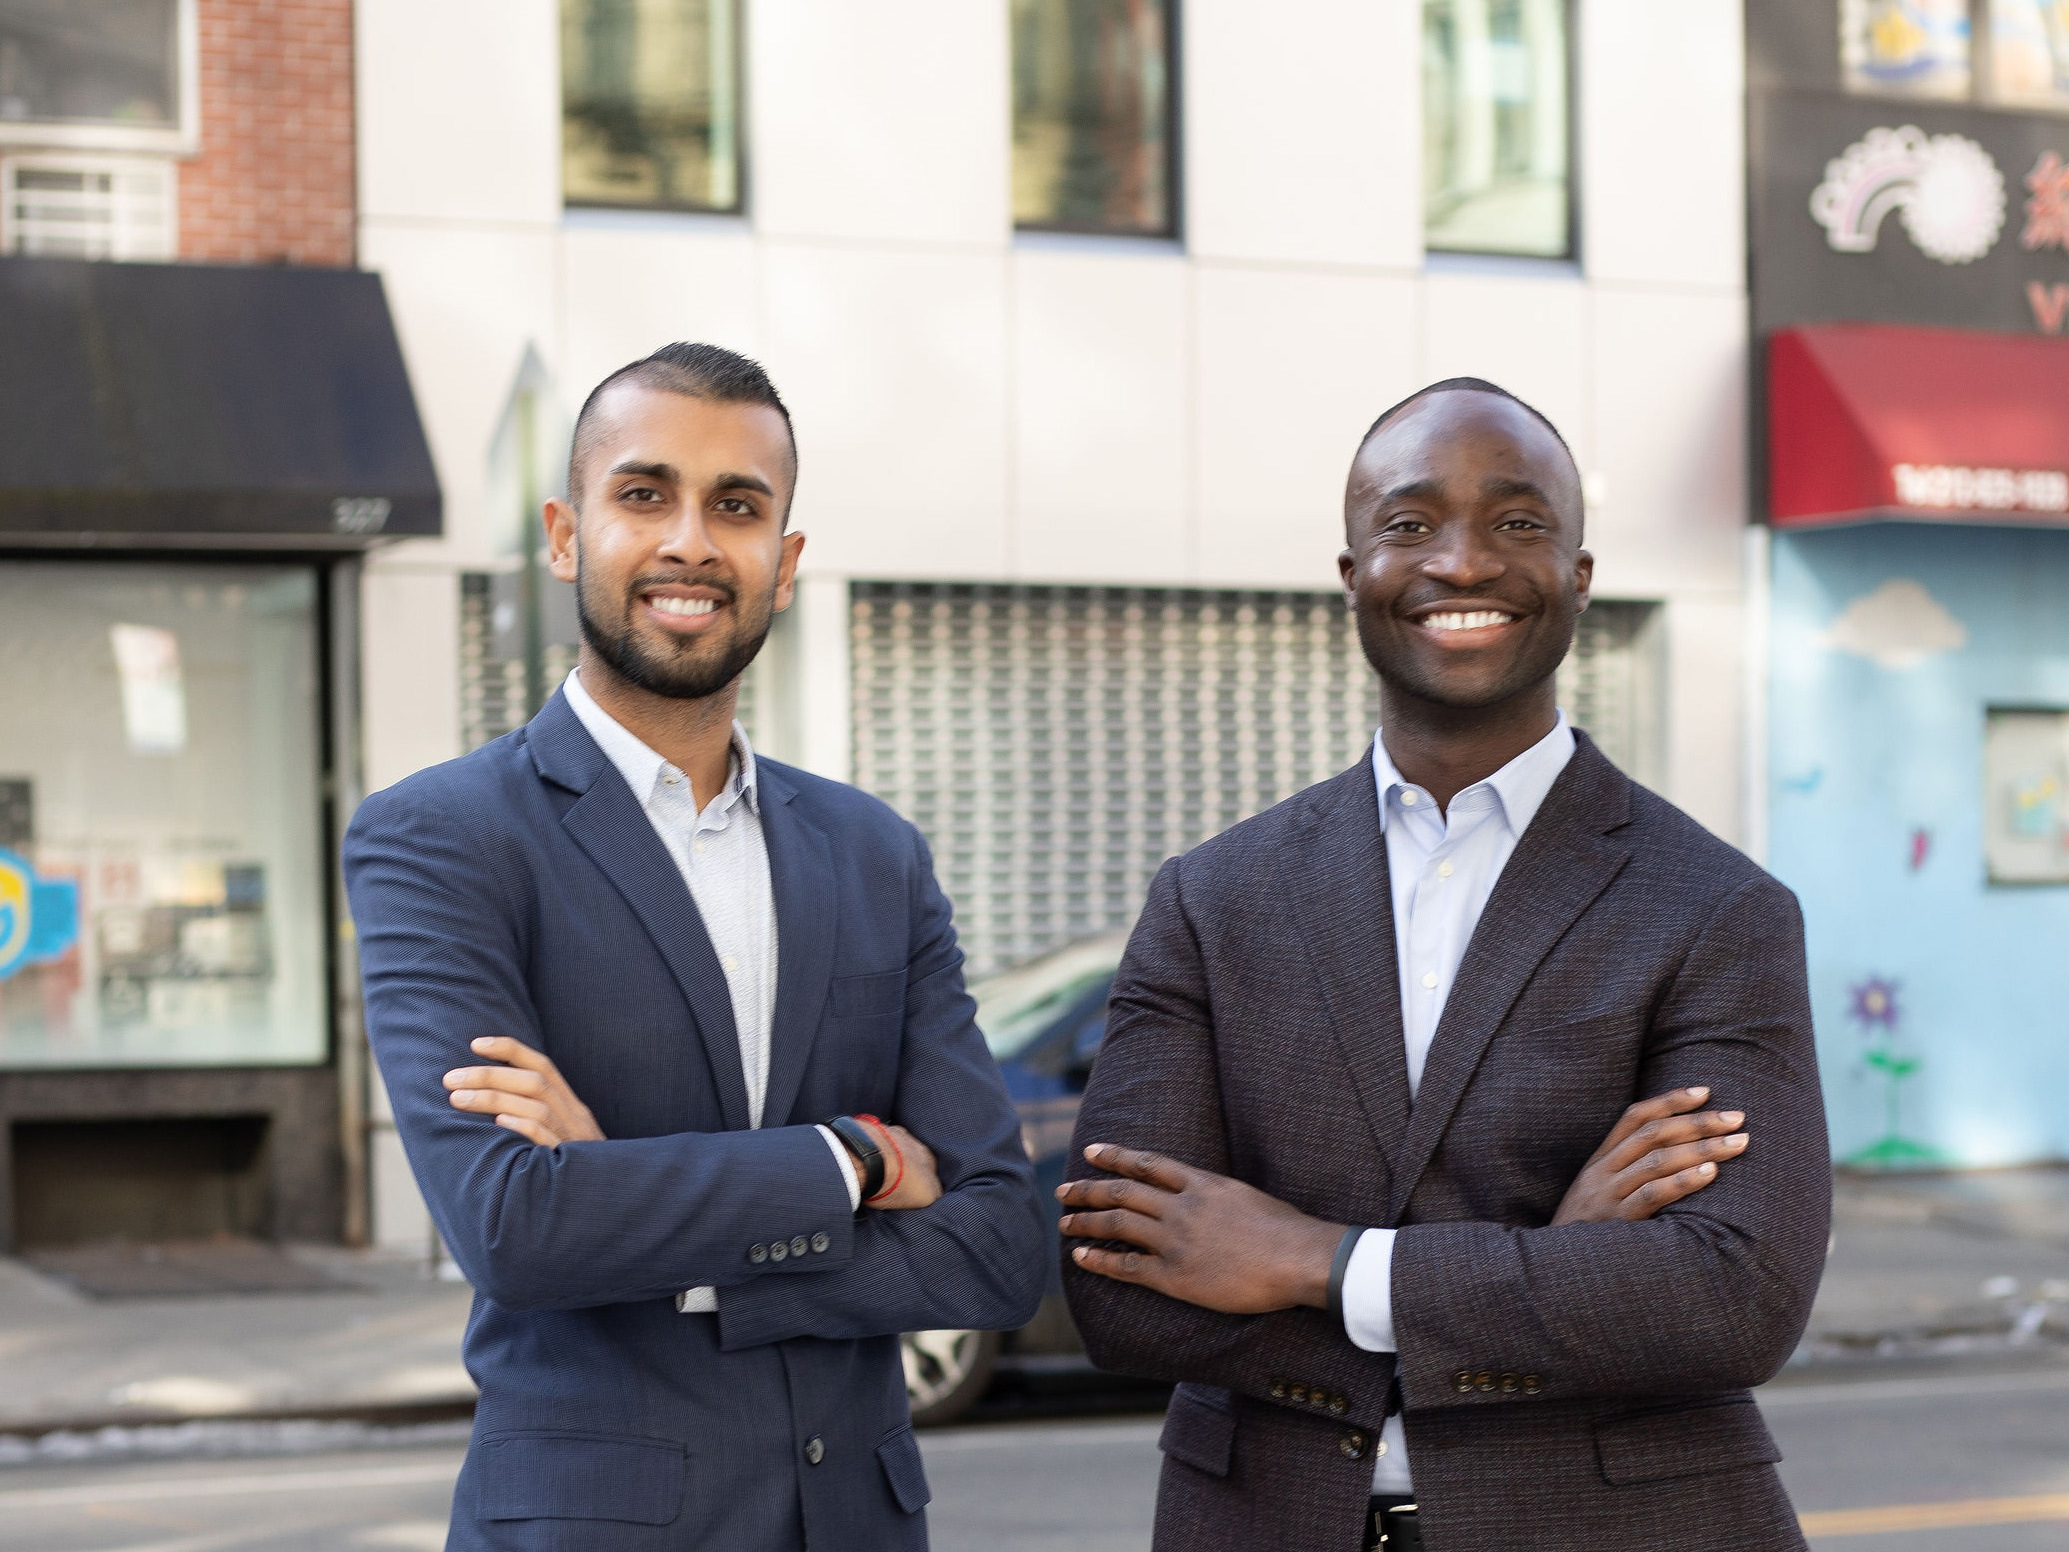 Entrepreneur Abbey Wemimo Hopes to Close Racial Wealth Gap Through His Credit-Building Startup